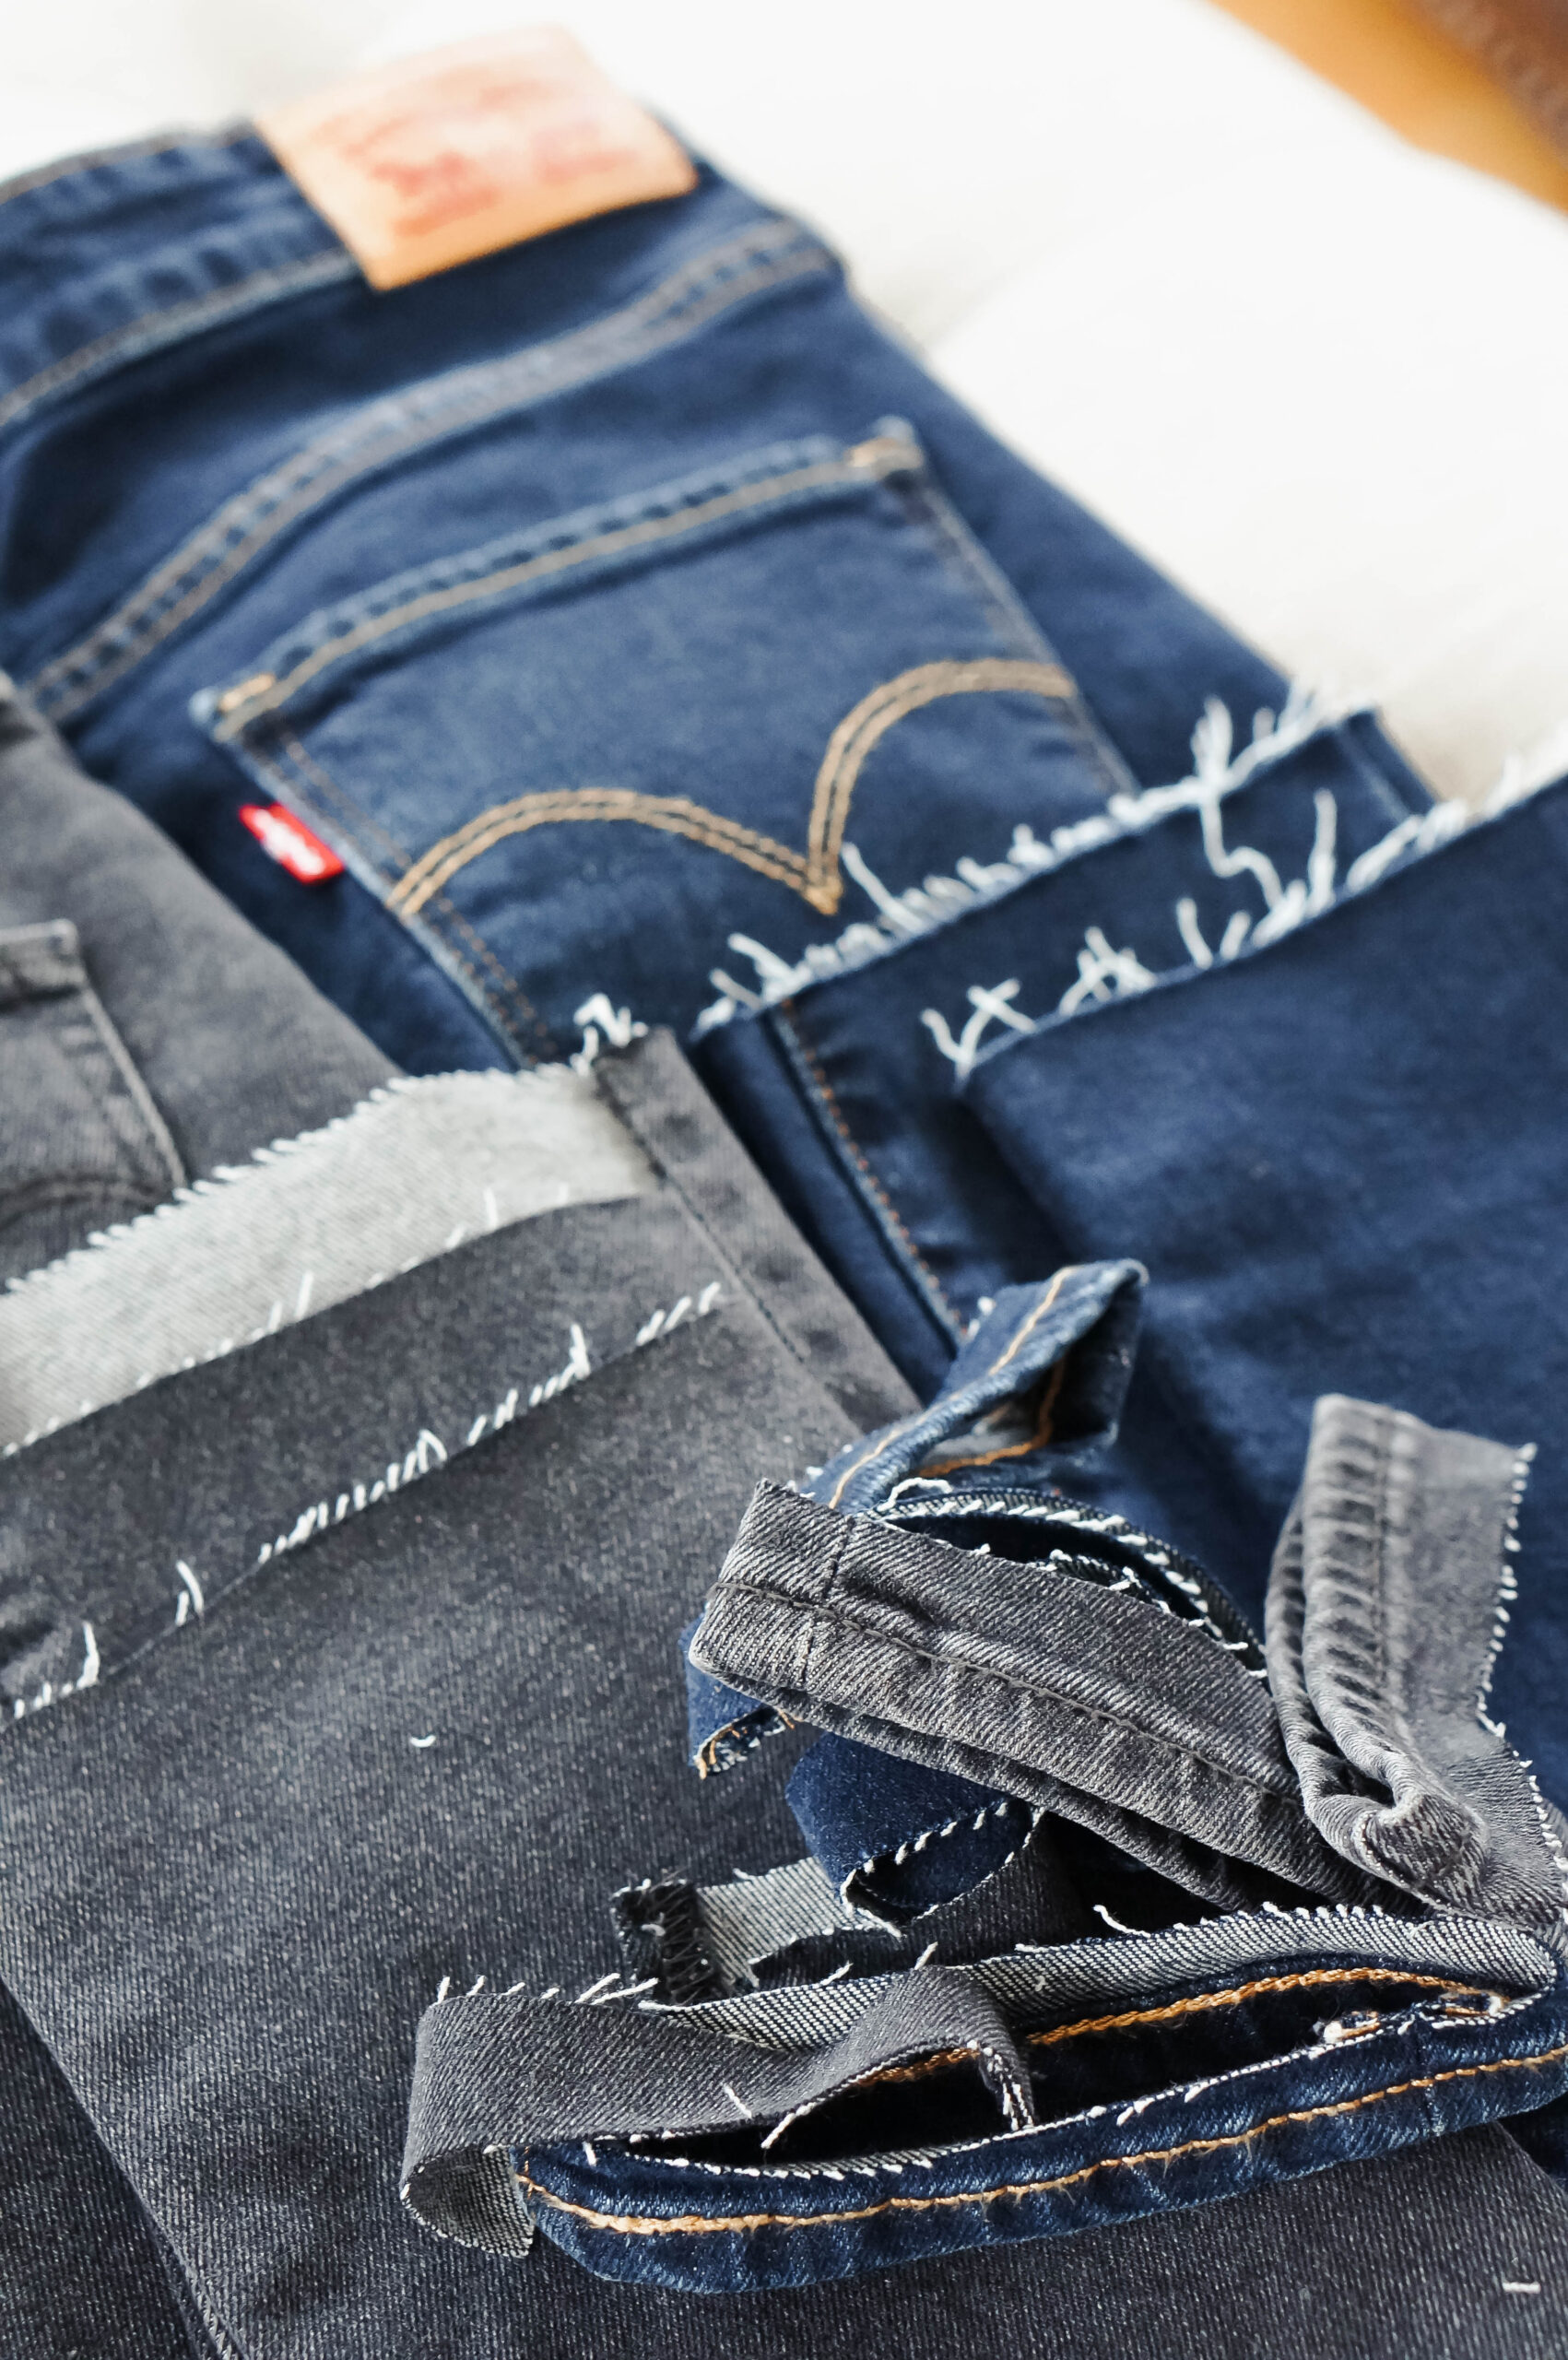 How to Hem Jeans: A Complete Guide with Pictures and Videos